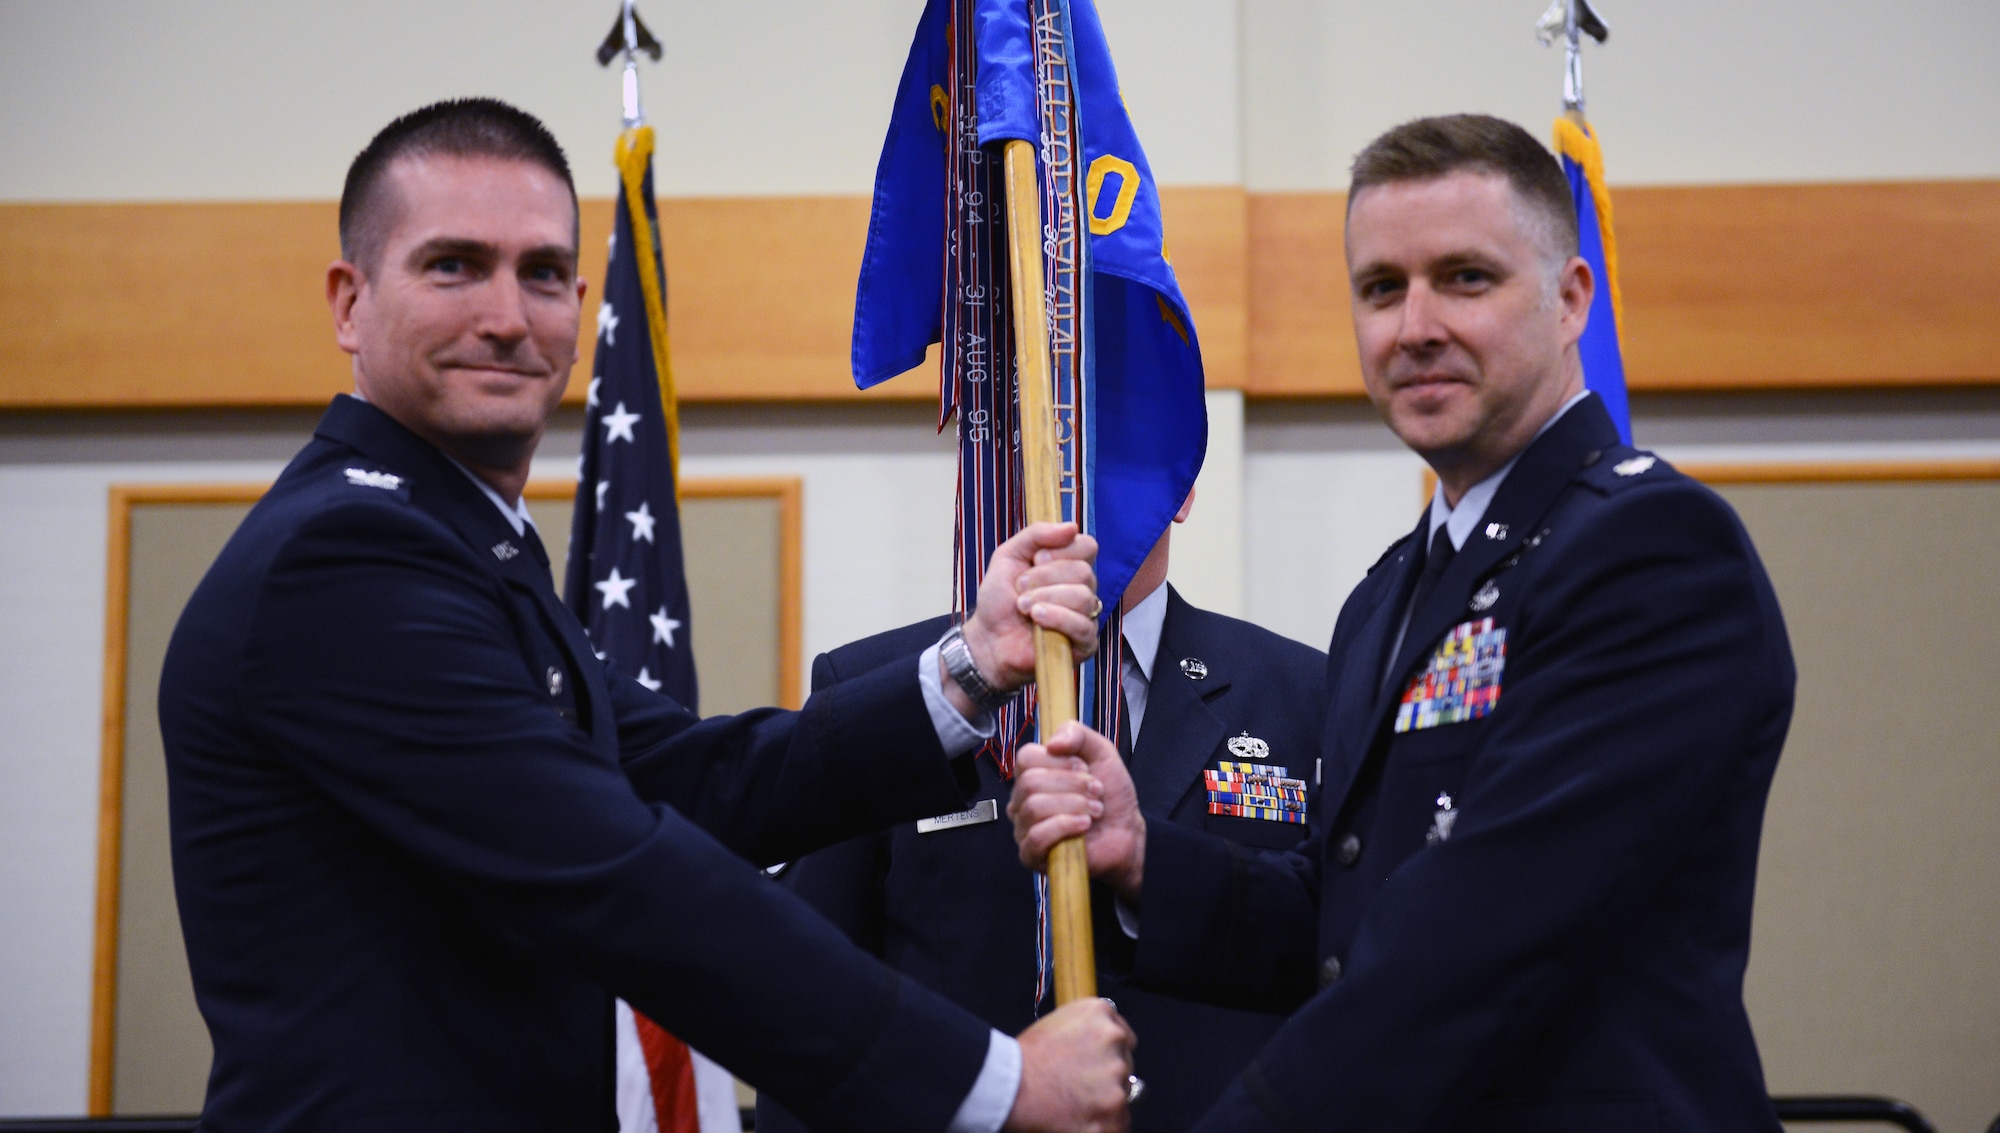 Lt. Col. Jeffrey Regan, right, accepts command of the 10th Missile Squadron from Col. Christopher Menuey, 341st Operations Group commander, during a change of command ceremony June 20, 2019, at the Grizzly Bend on Malmstrom Air Force Base, Mont. Guidon bearer Master Sgt. Brook Mertens, 10th MS facility manager, looks on. (U.S. Air Force photo by Staff Sgt. Magen M. Reeves)